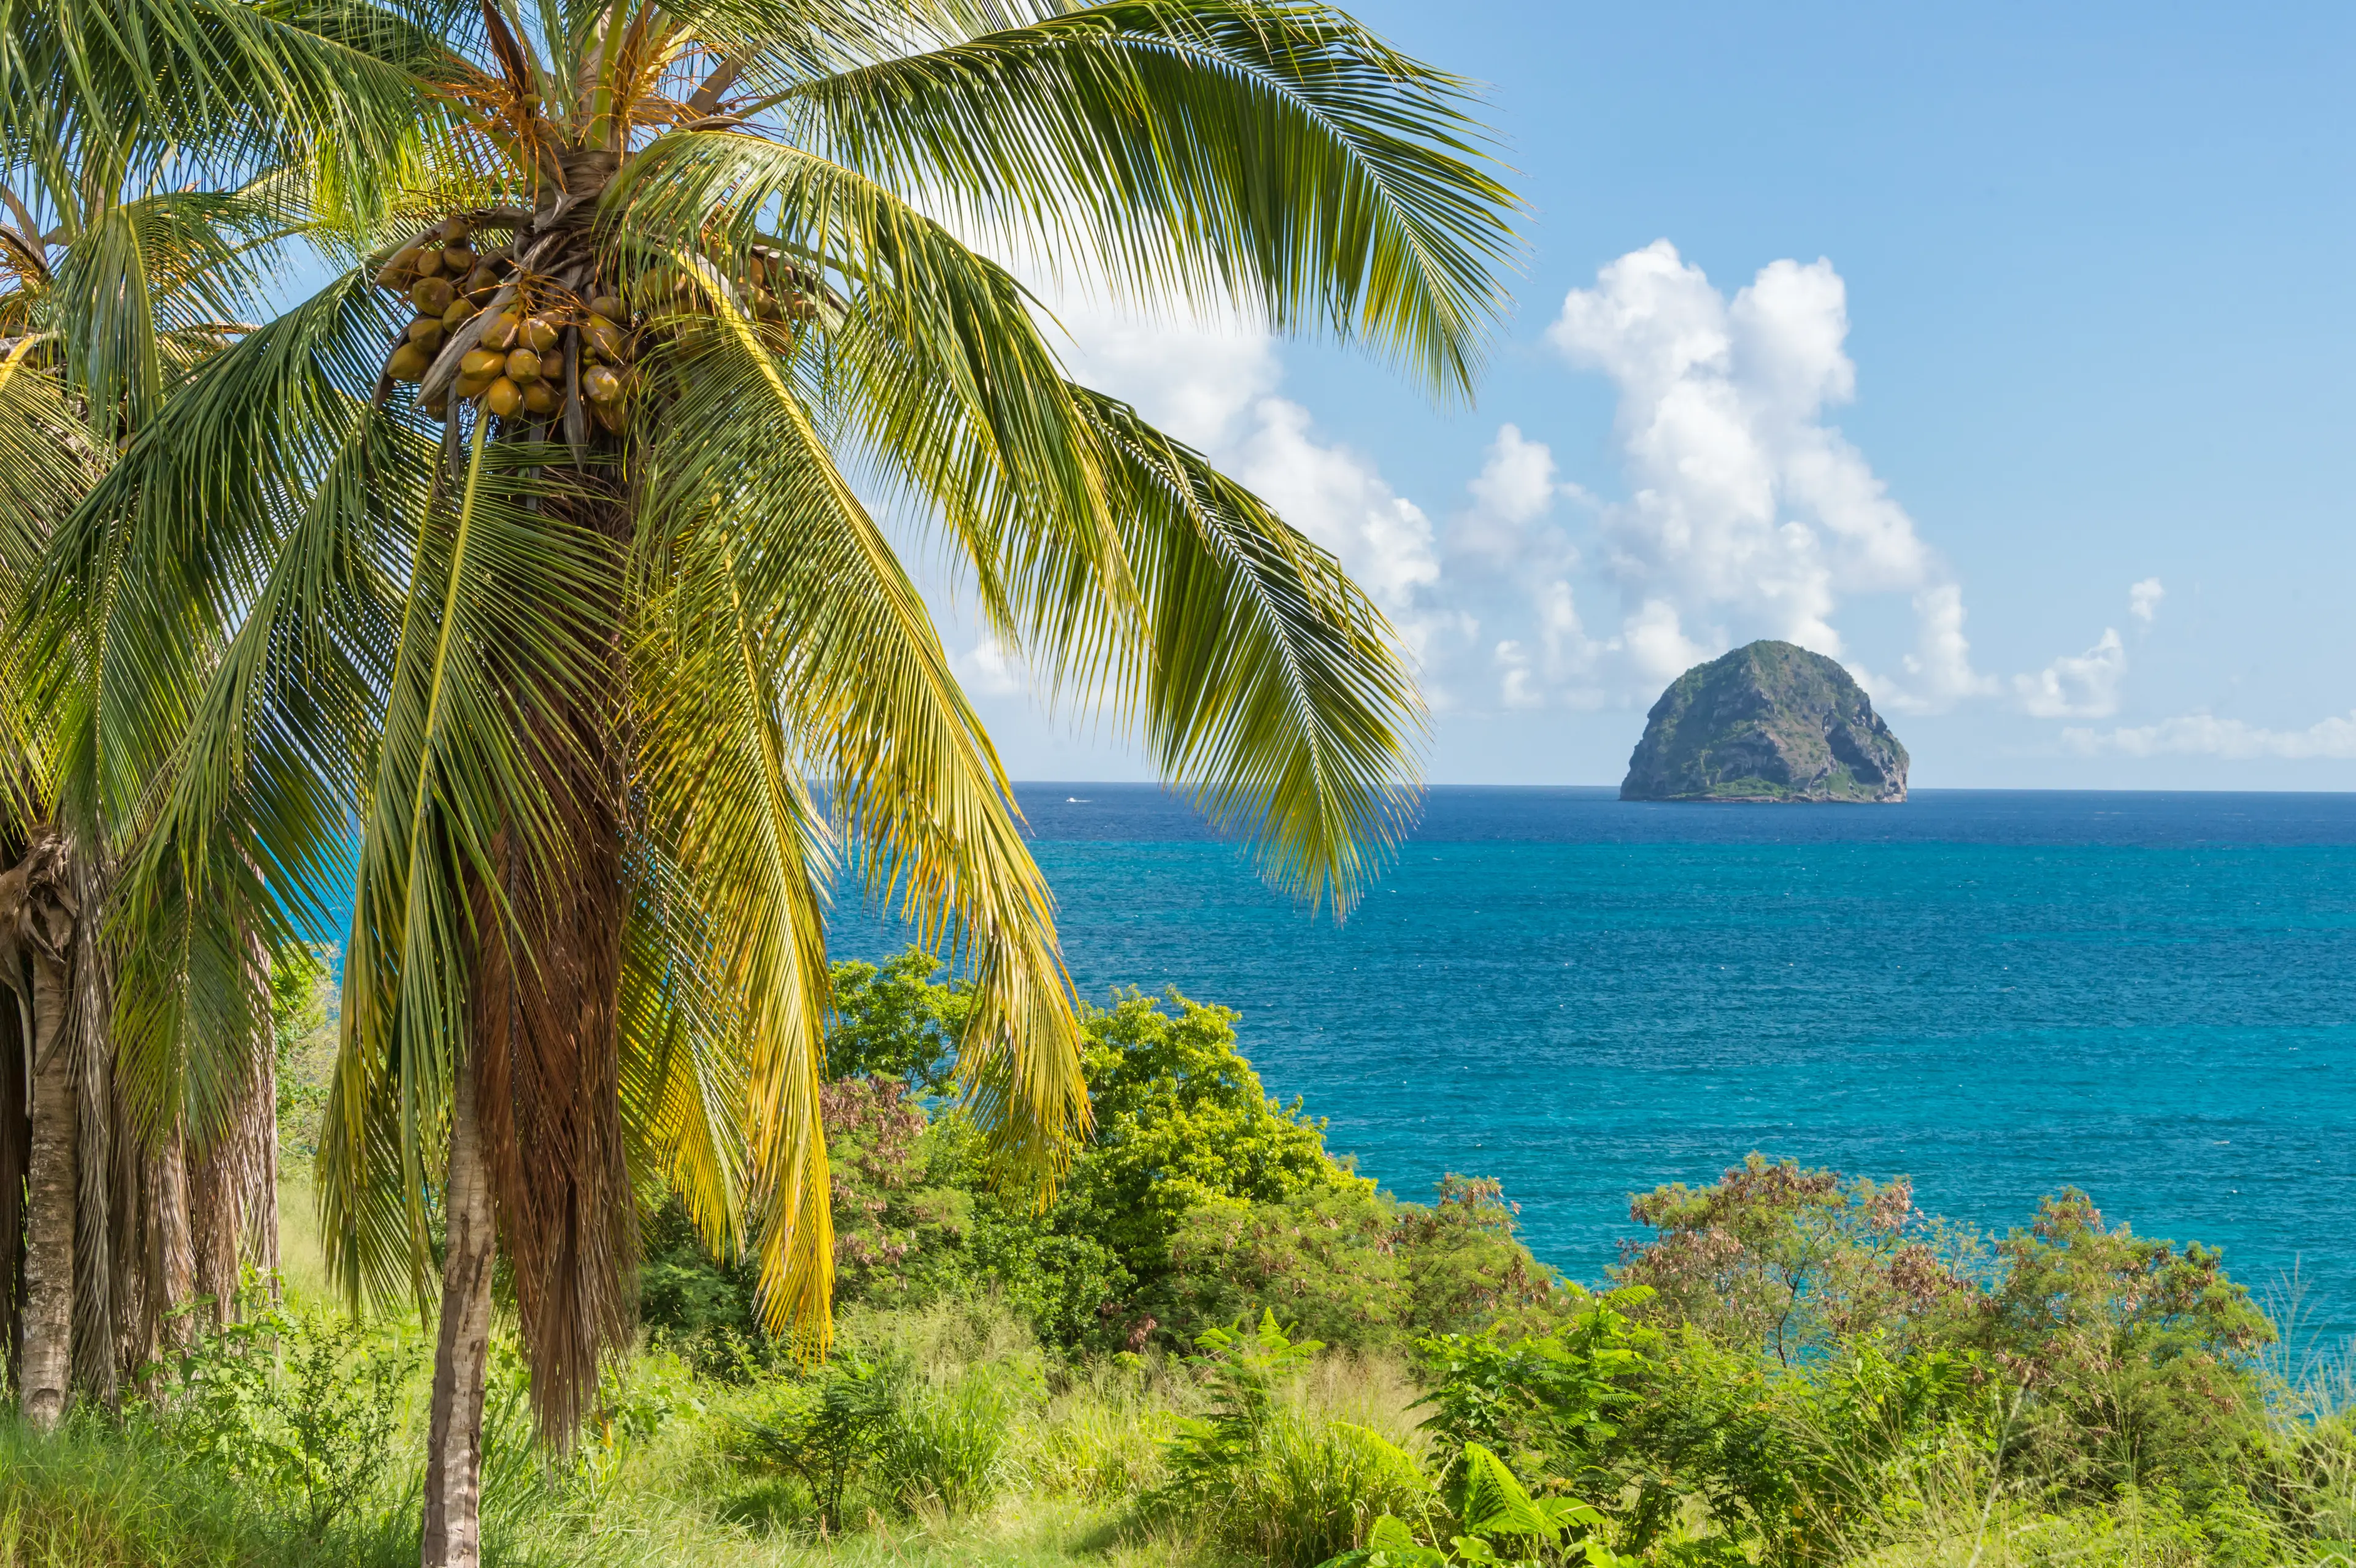 4-Day Solo Adventure and Sightseeing in Martinique, Caribbean